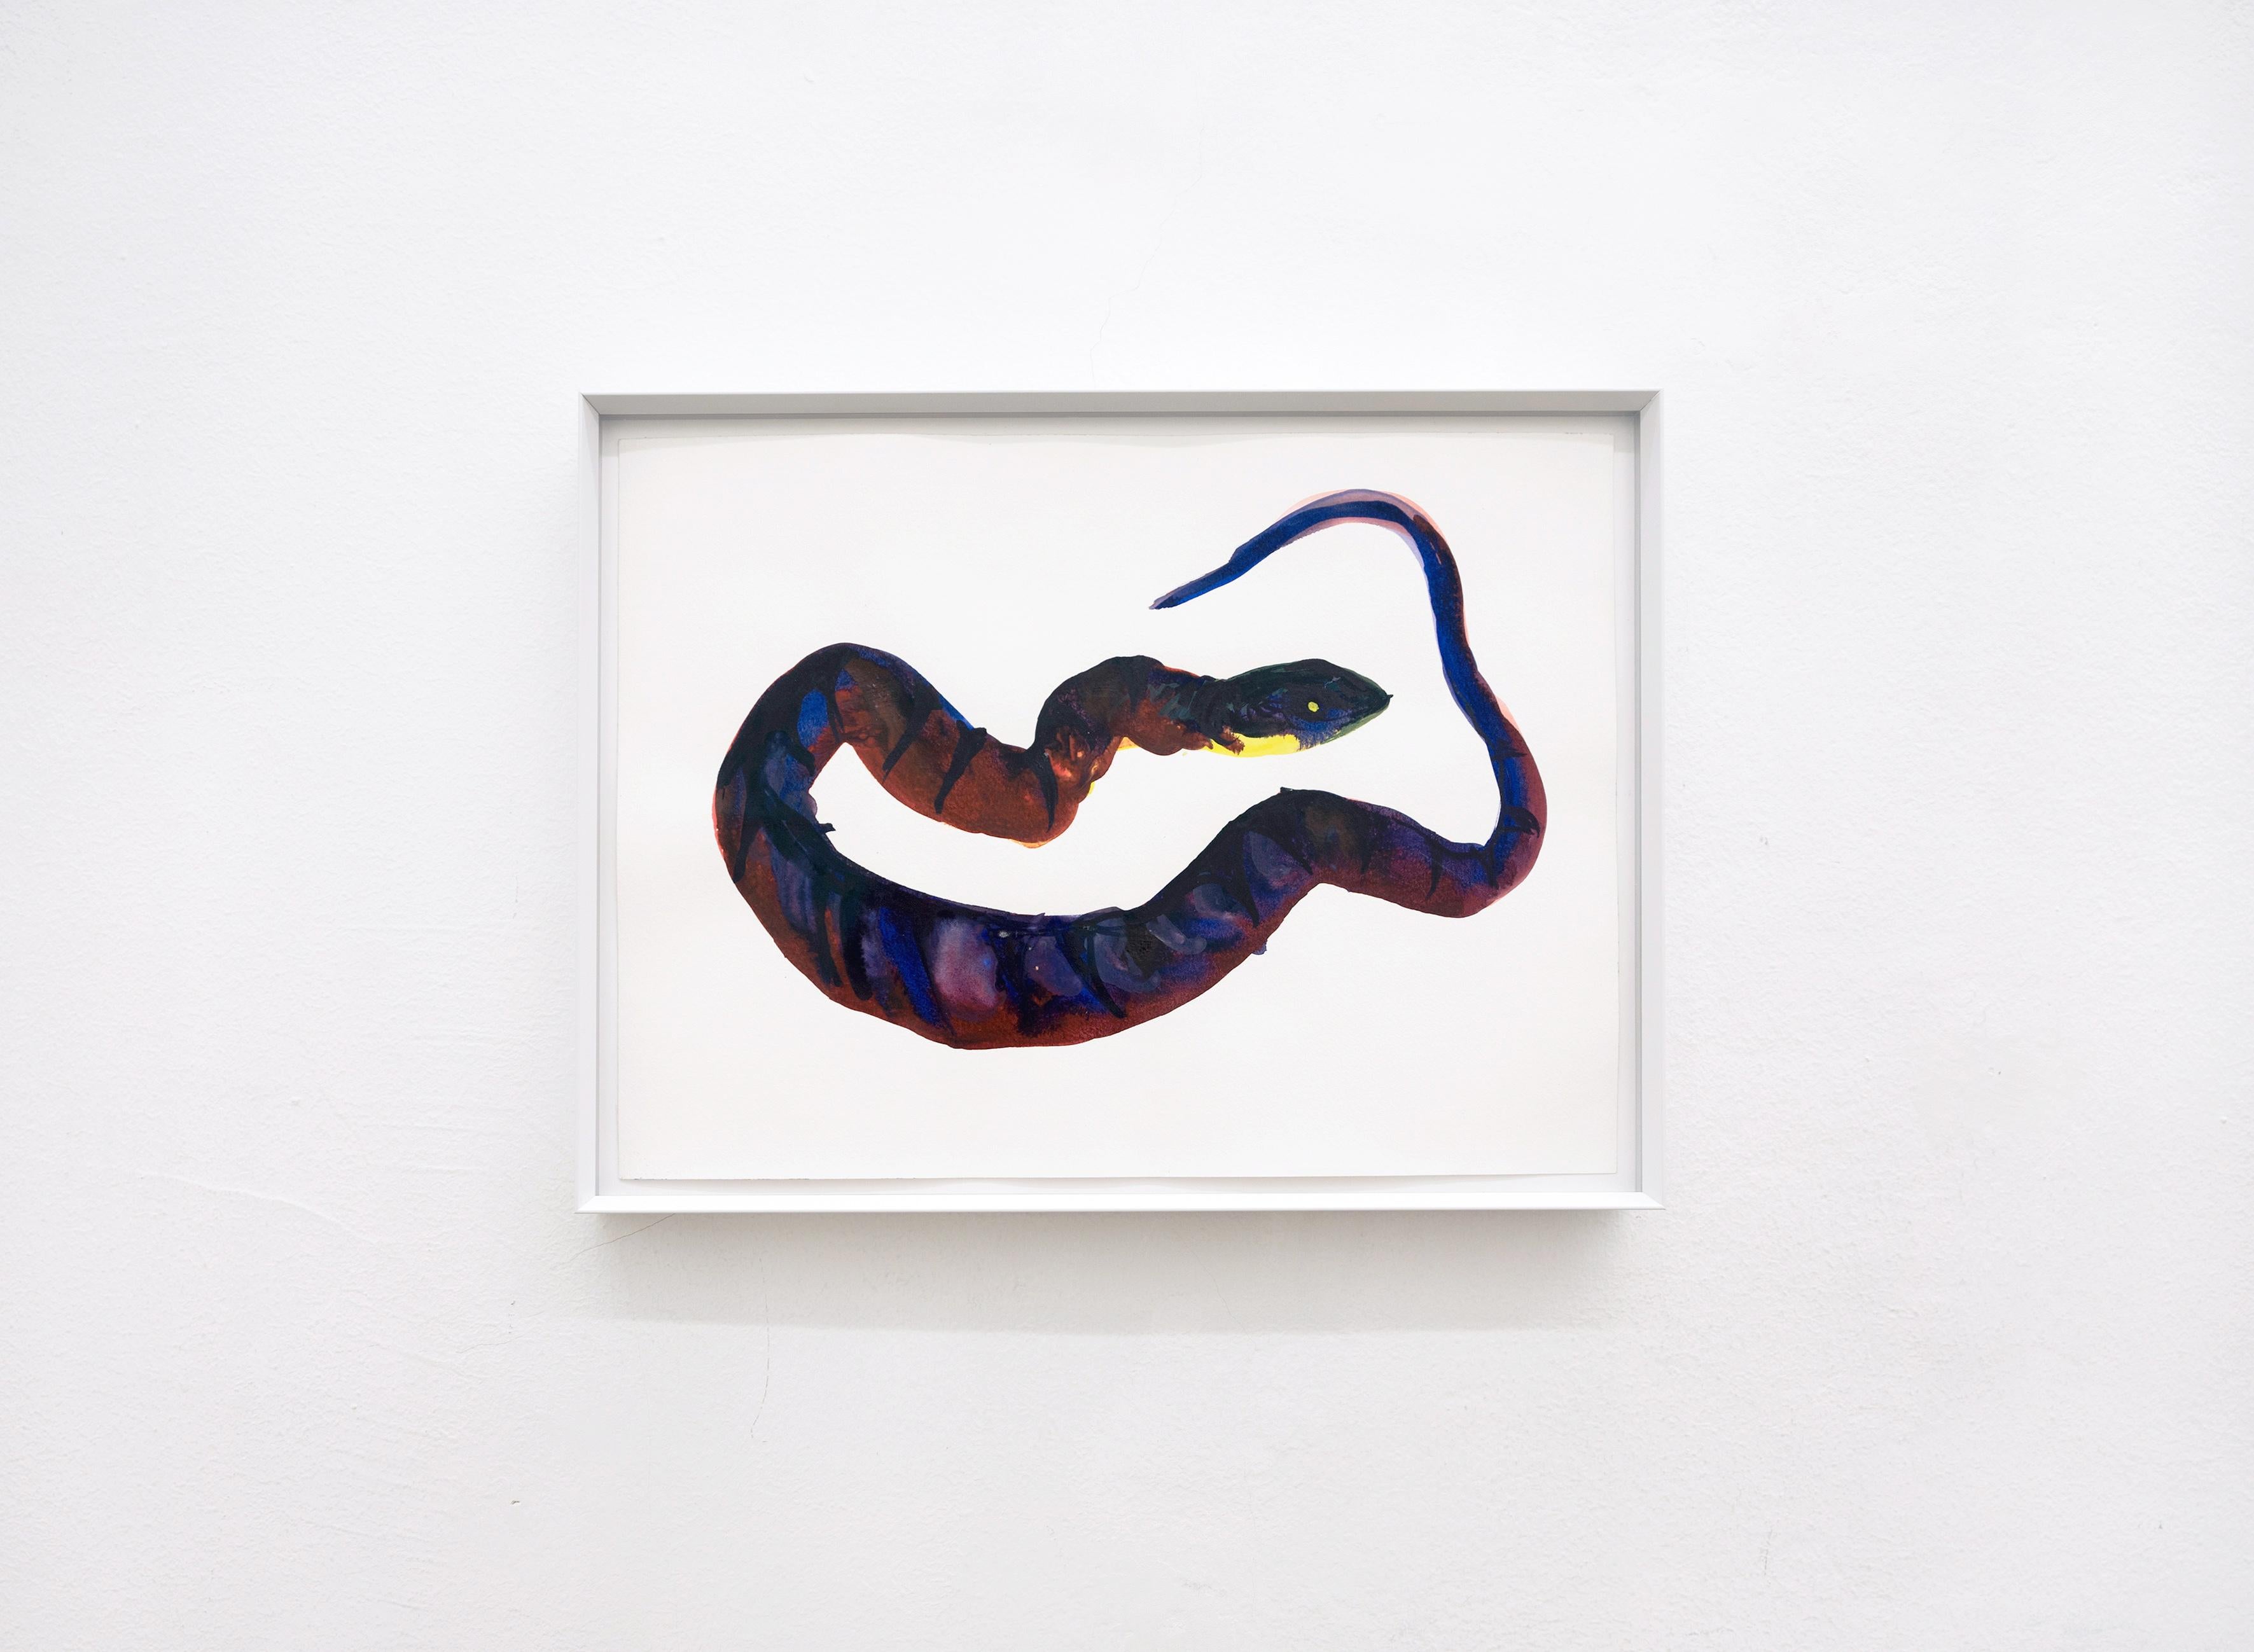 Snake II - 21st Century Animal Drawings and Watercolors Red Blue Unique Copy

Tina Ribarits works with a conceptual approach in a variety of media including installation, video and photography to create site-specific installative objects. Her work